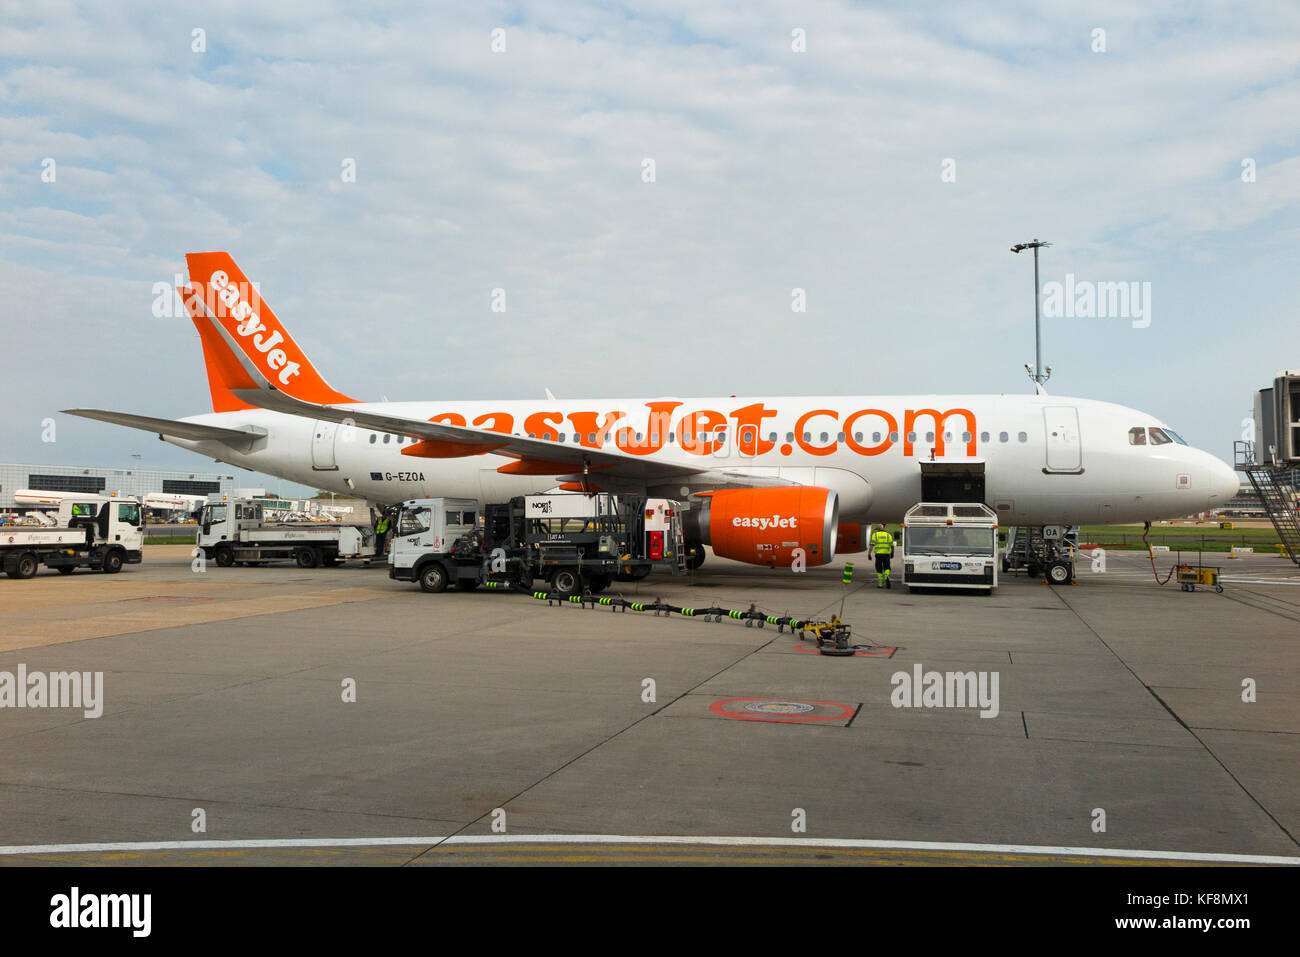 Refuelling between flights, Airbus A320 plane number G-EZOA operated by Easyjet refuels from underground tank on apron at Gatwick airport, London. UK Stock Photo